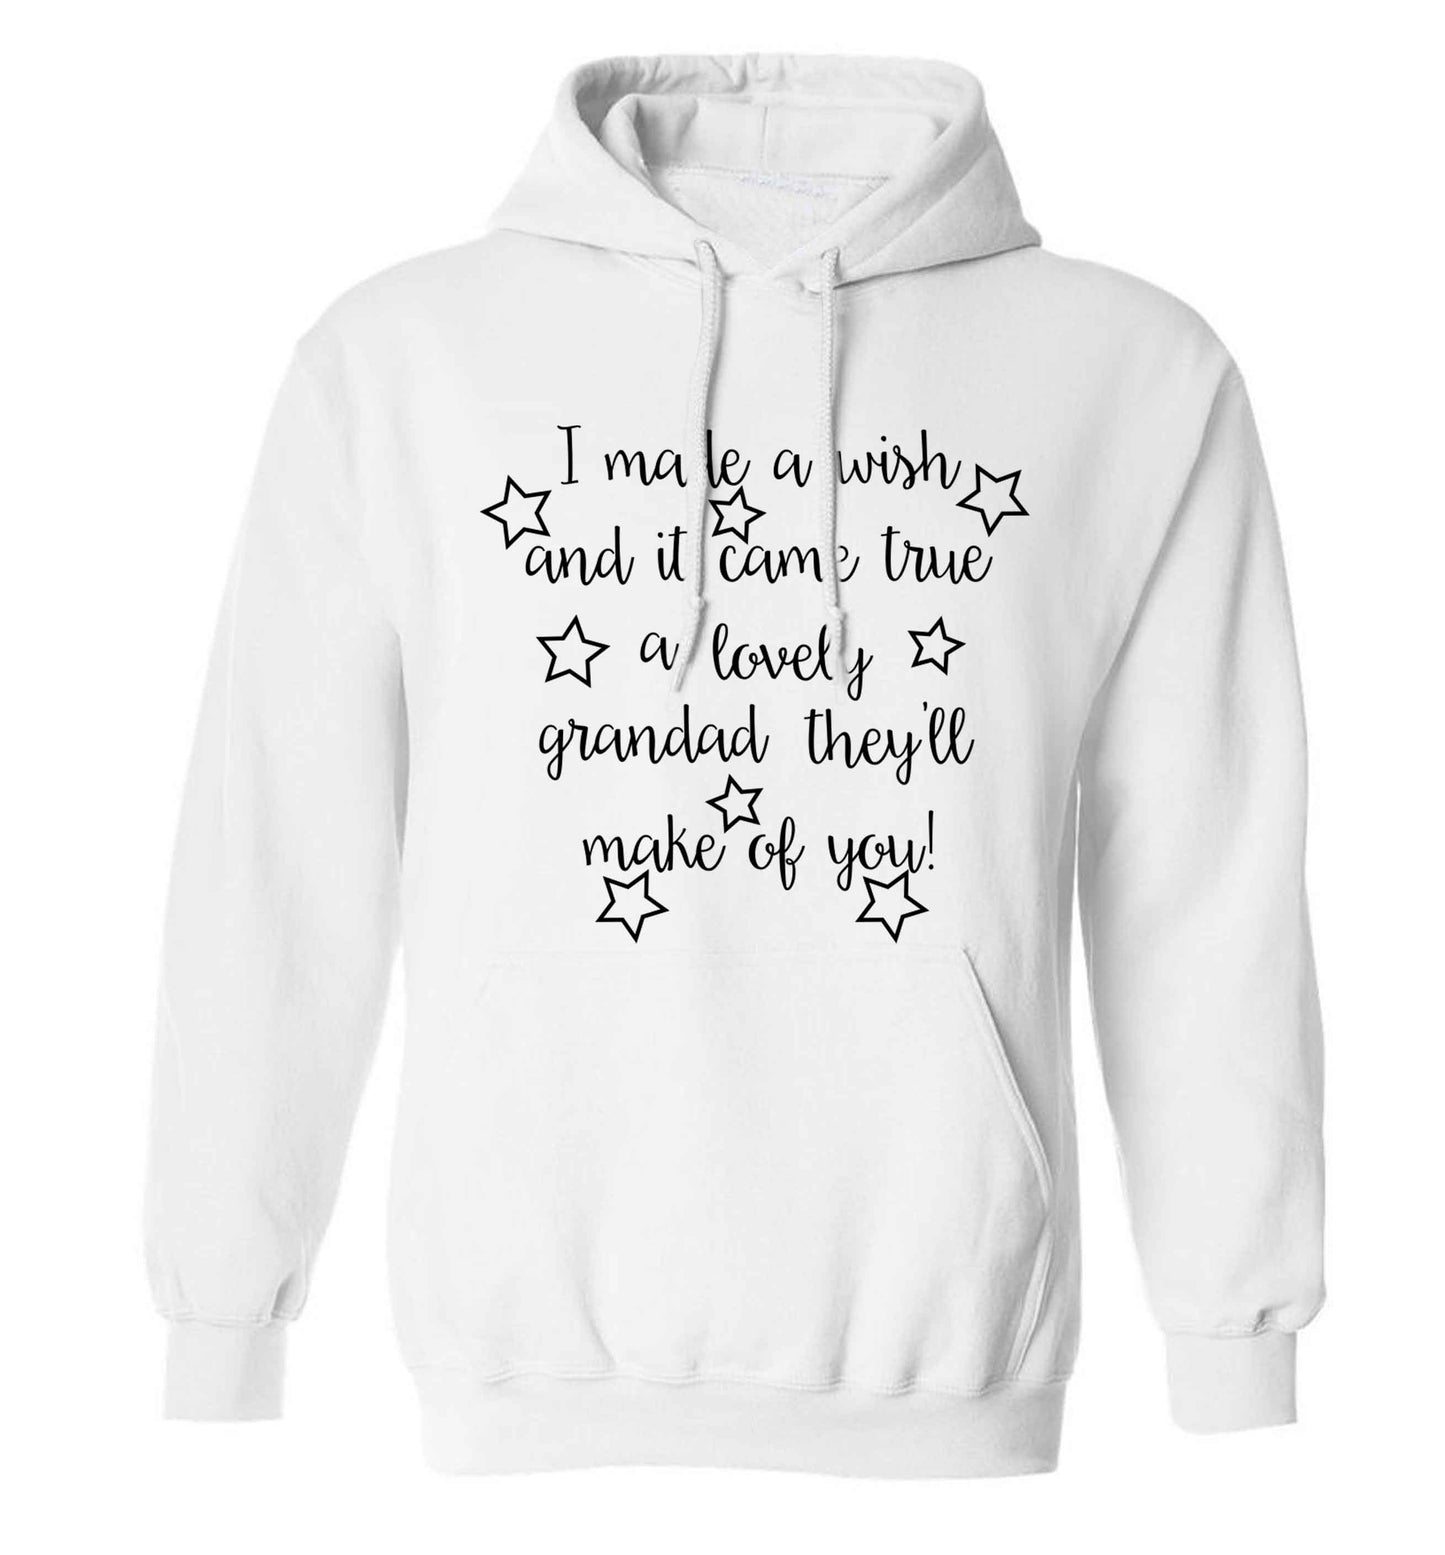 I made a wish and it came true a lovely grandad they'll make of you! adults unisex white hoodie 2XL